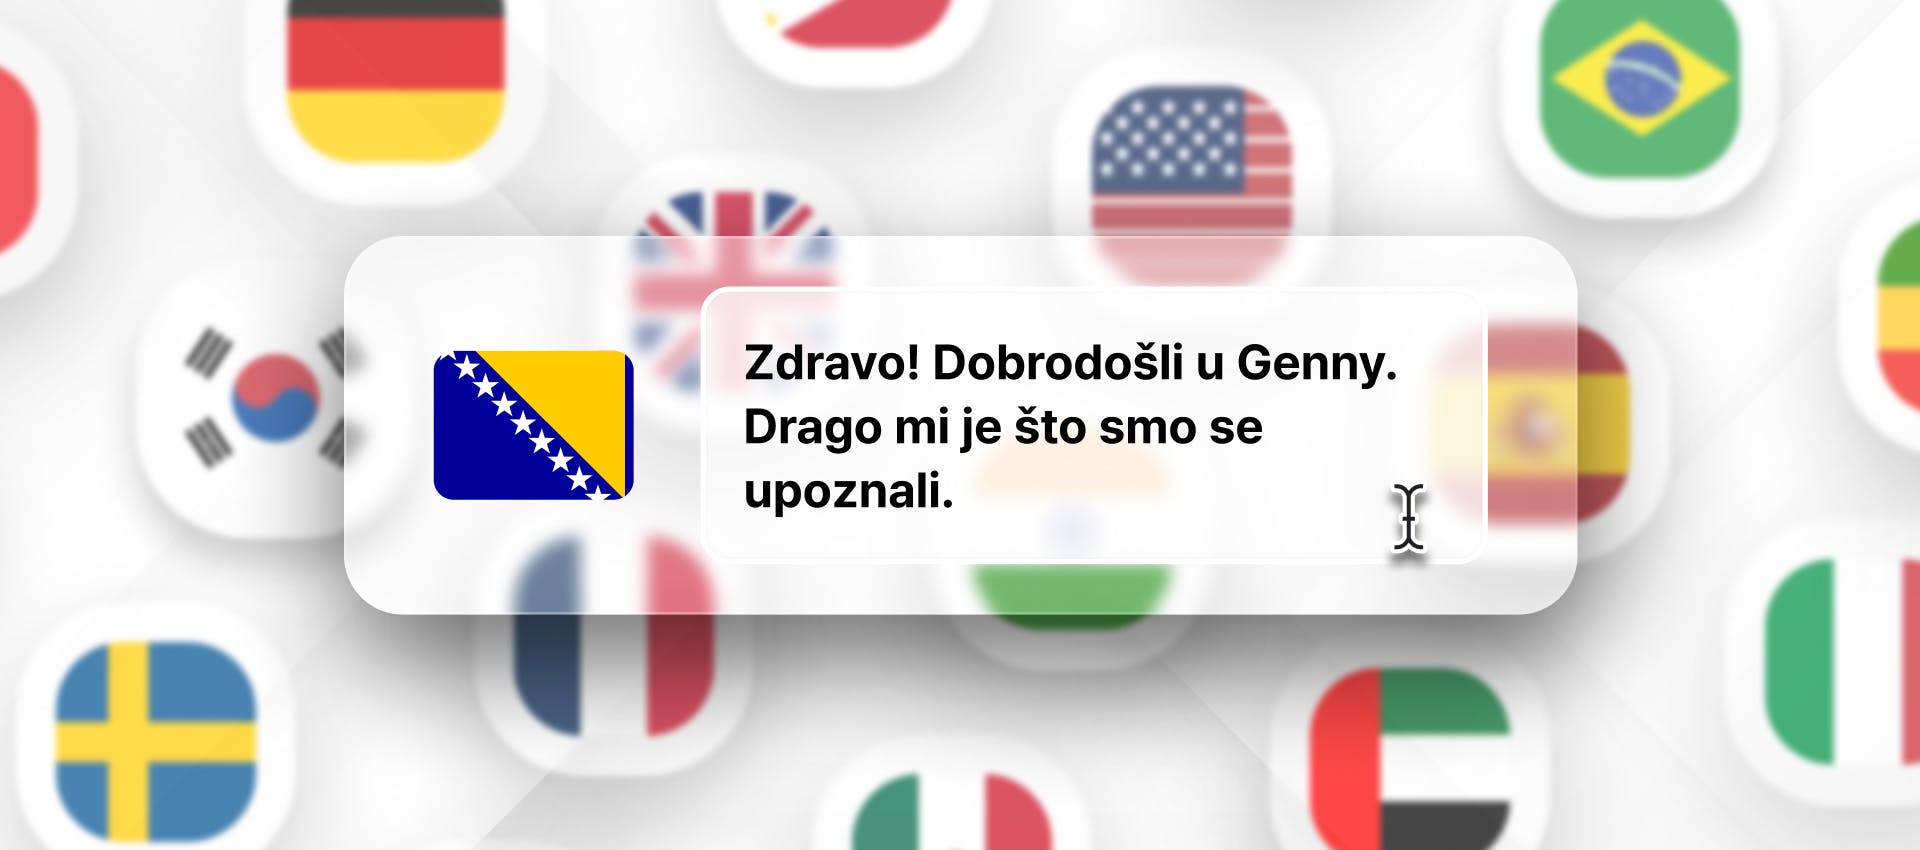 Bosnian phrase for Bosnian TTS generation with different flags in the background